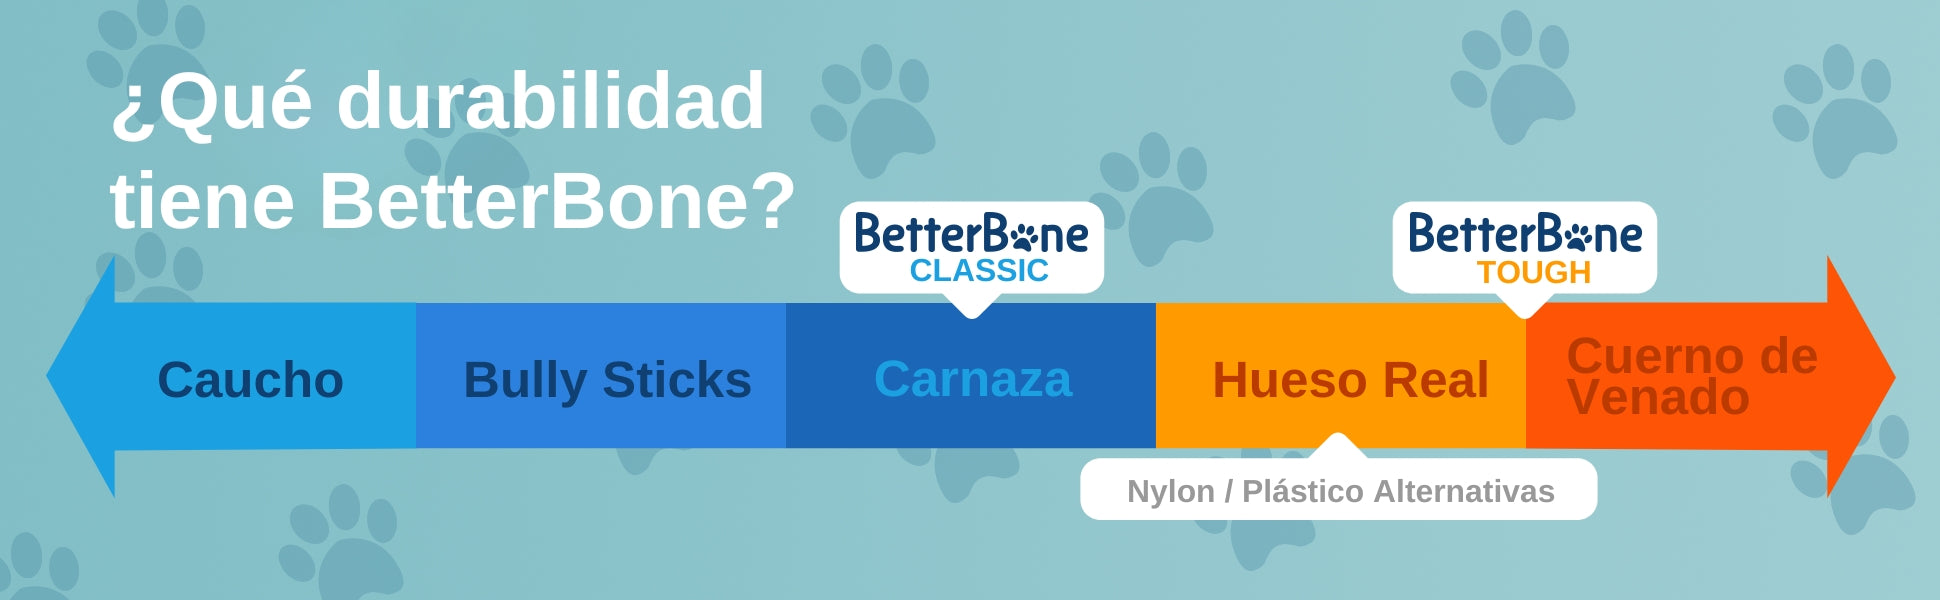 BetterBone CLASSIC Beef: Hueso Masticable con CARNE para Perros